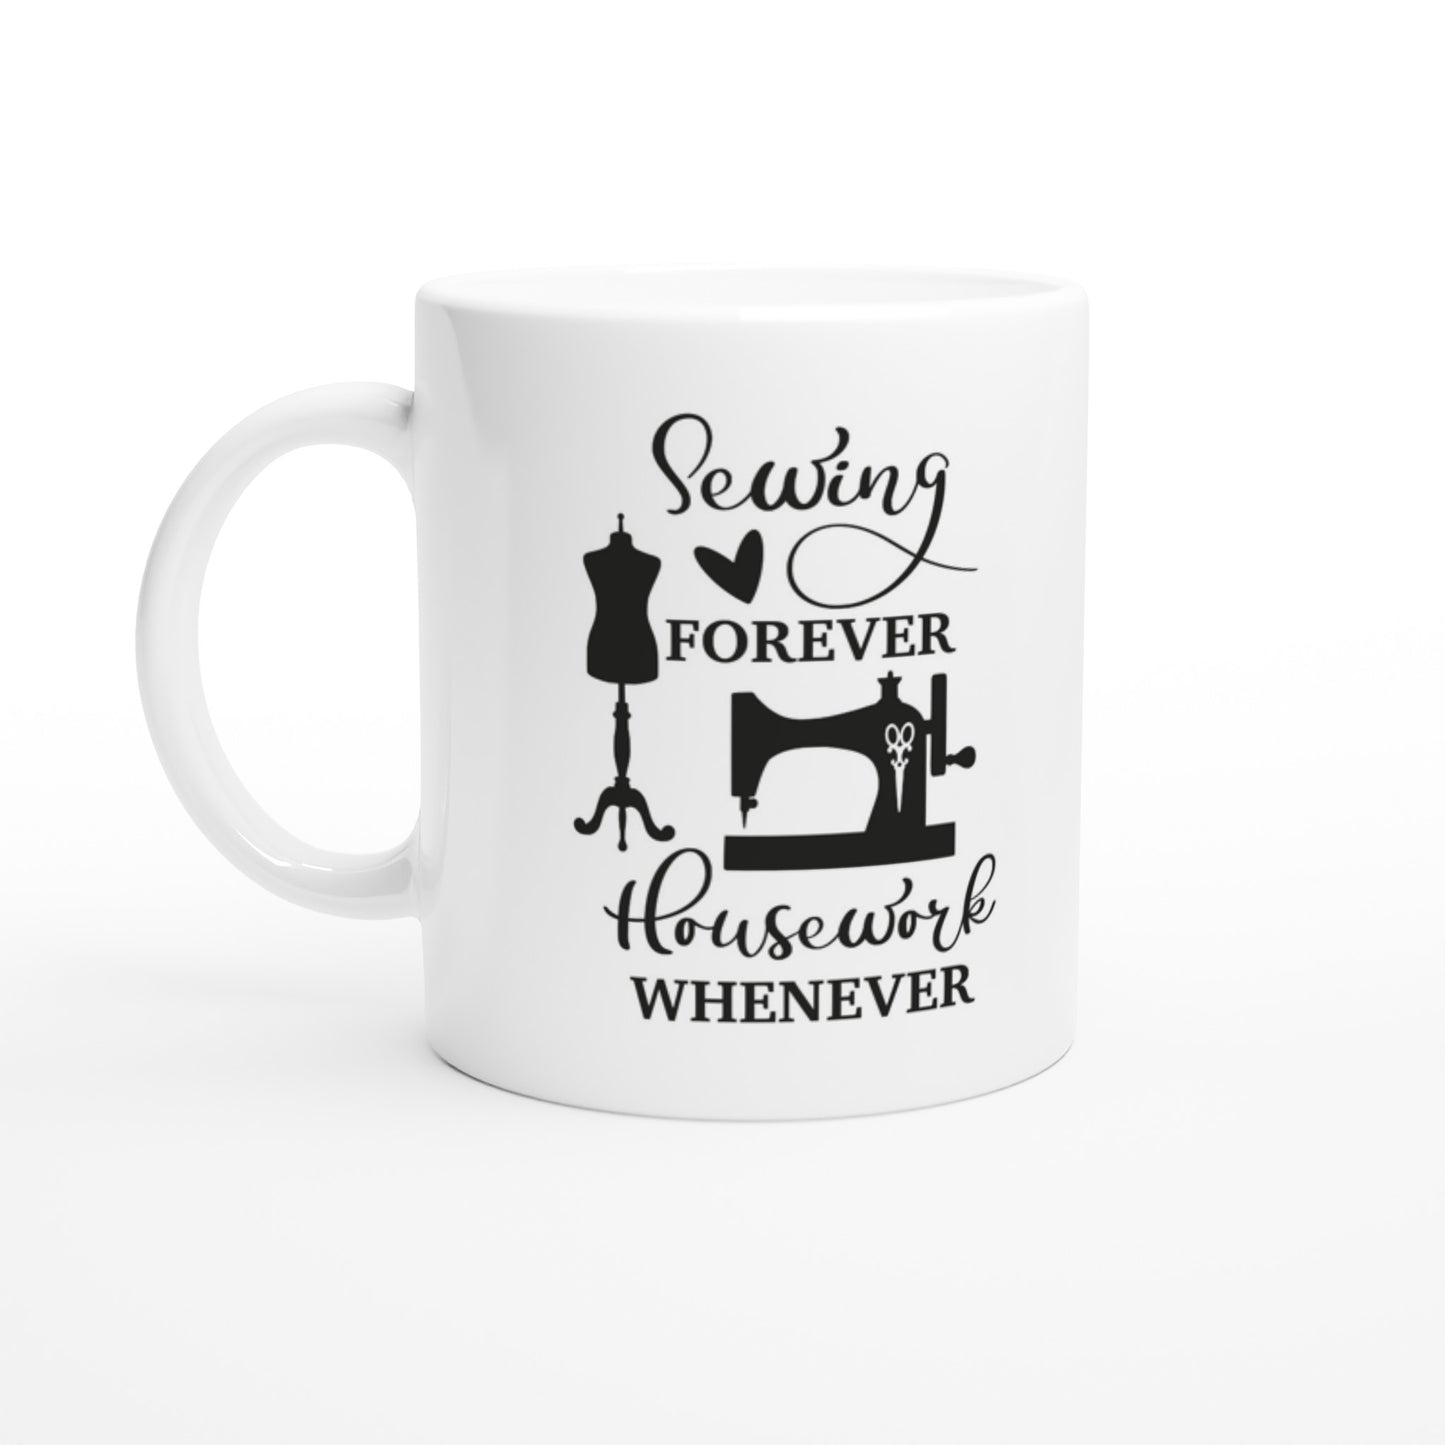 Sewing Forever Housework Whenever - Quilters Gift - White 11oz Ceramic Mug